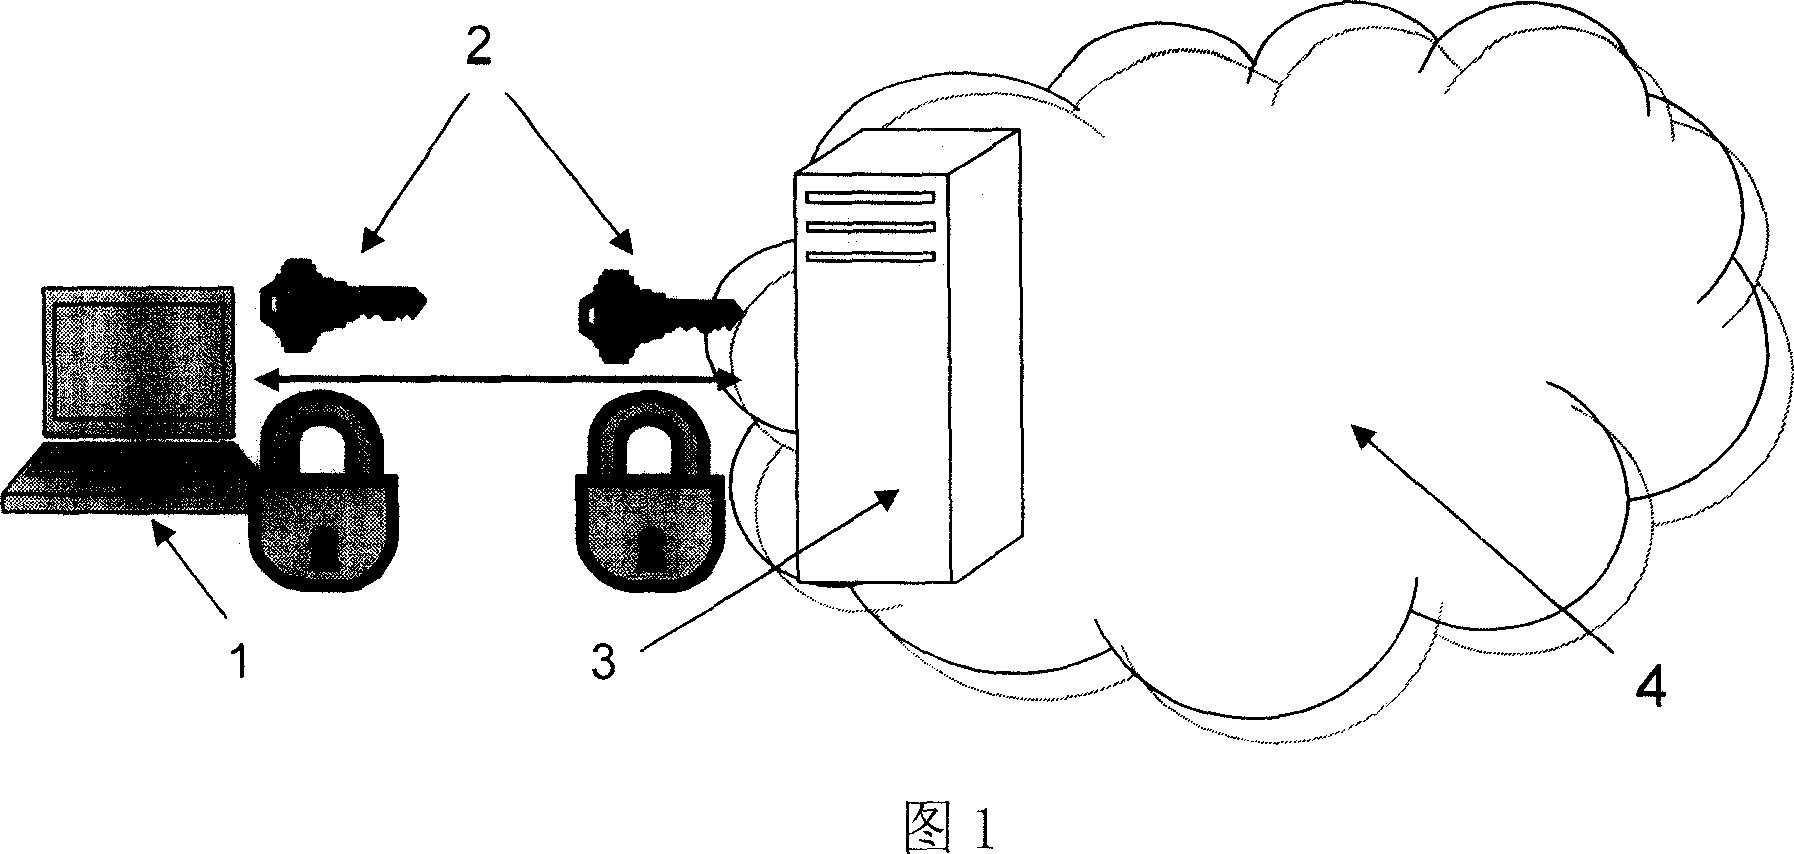 Coordinate access control system of ternary structure